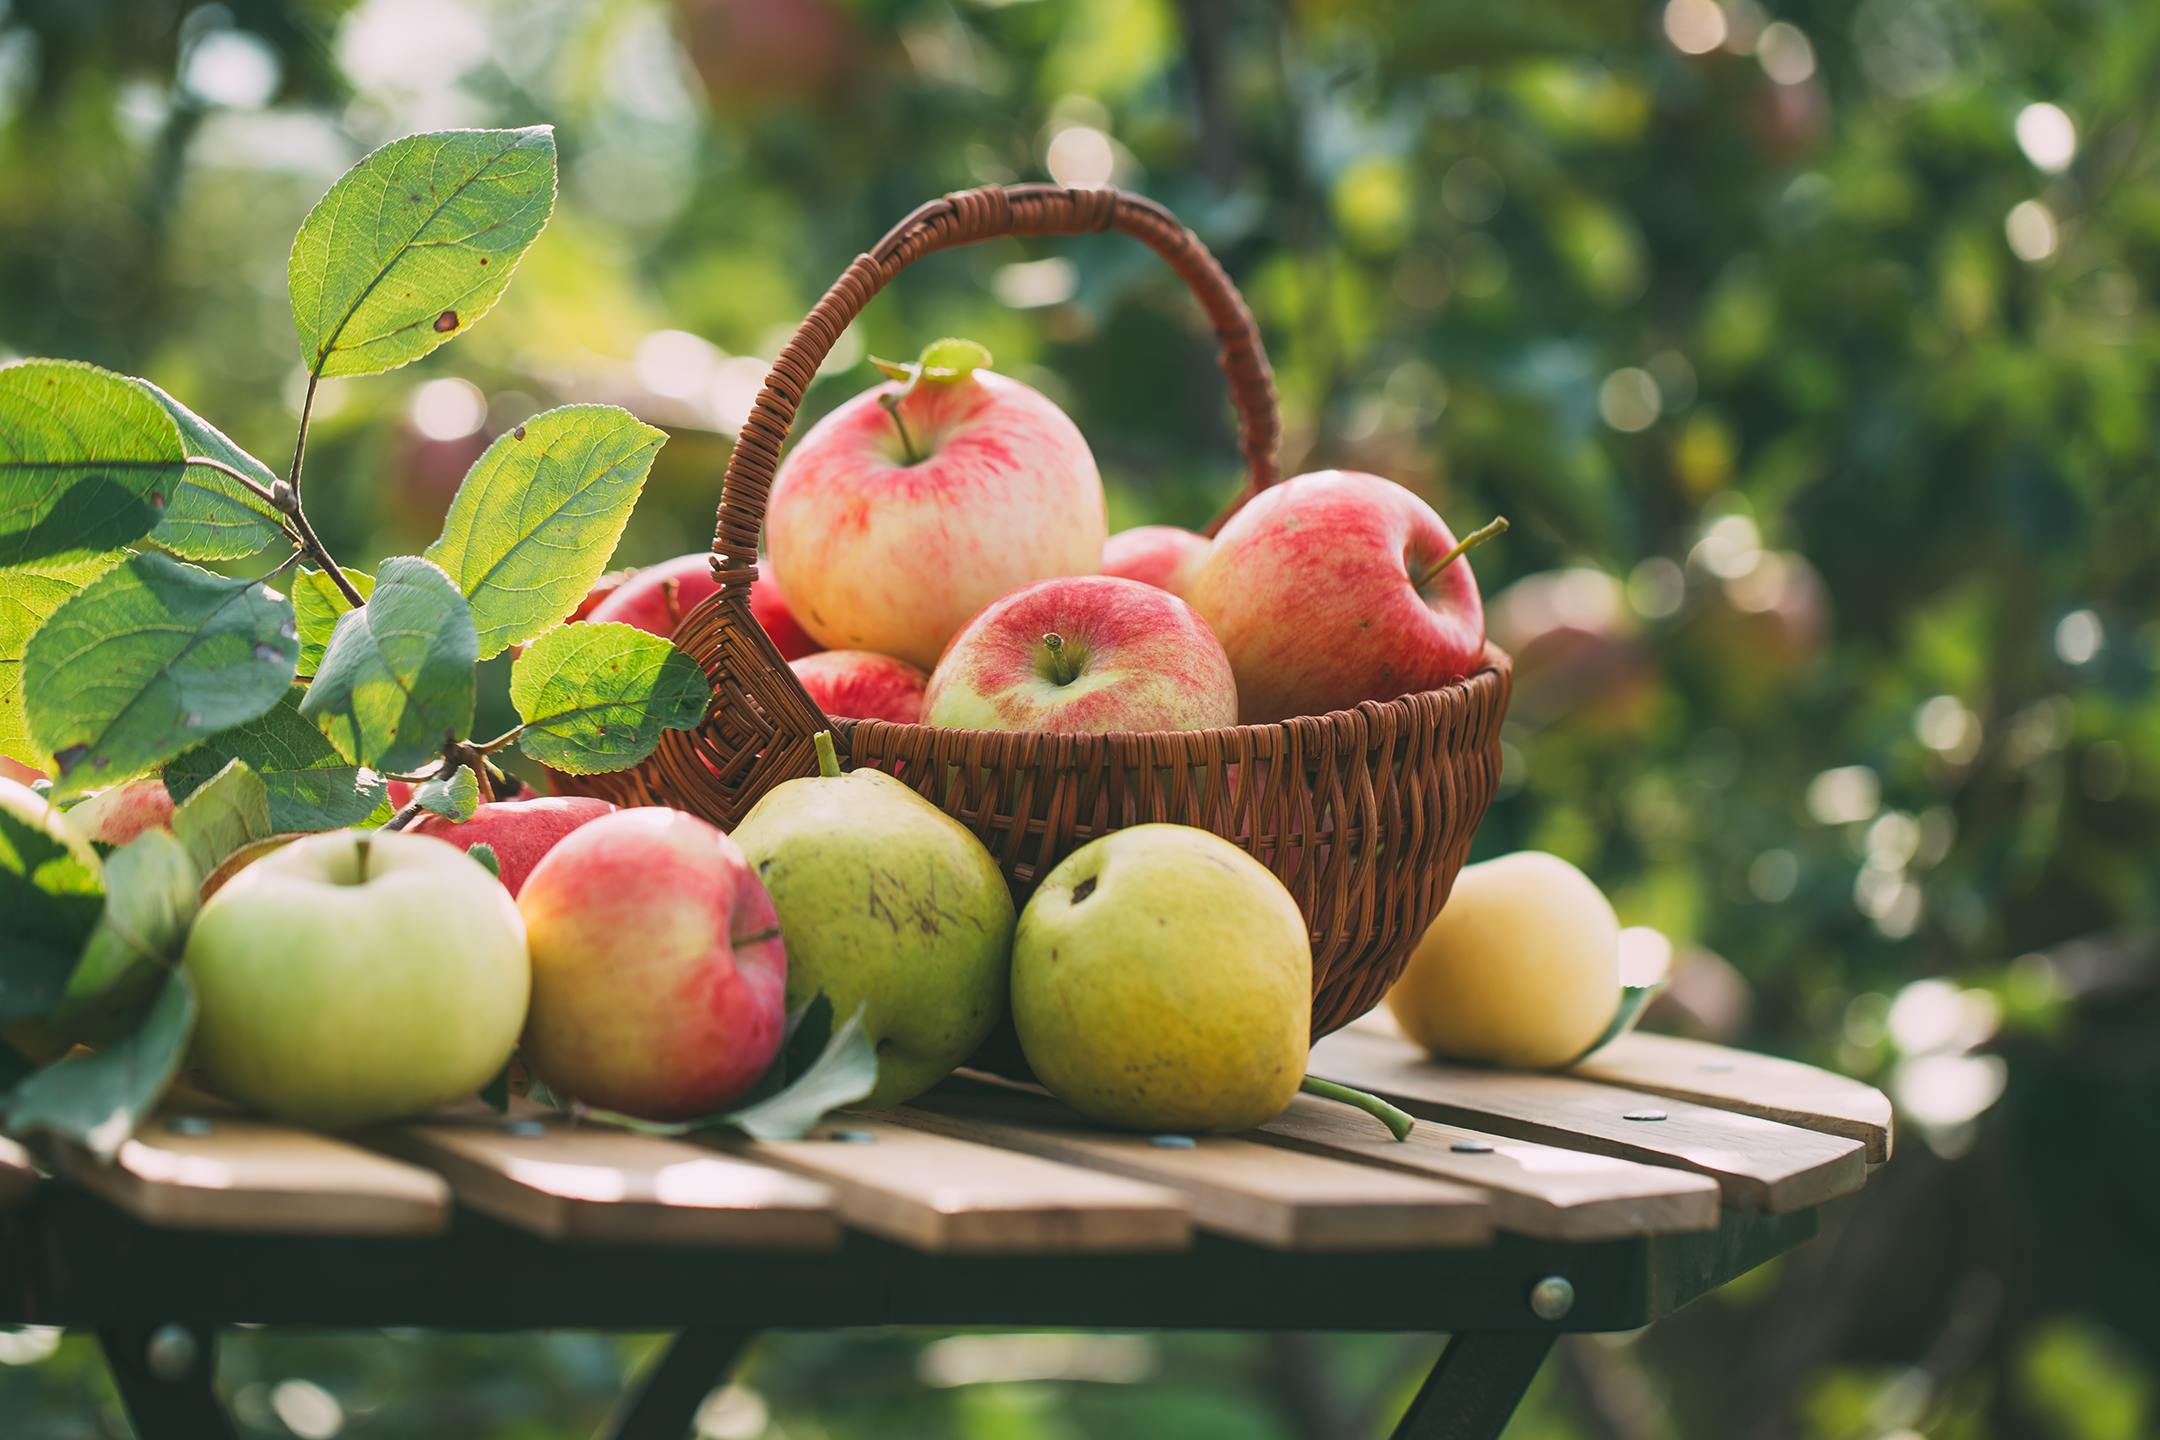 What are the health benefits of apples?